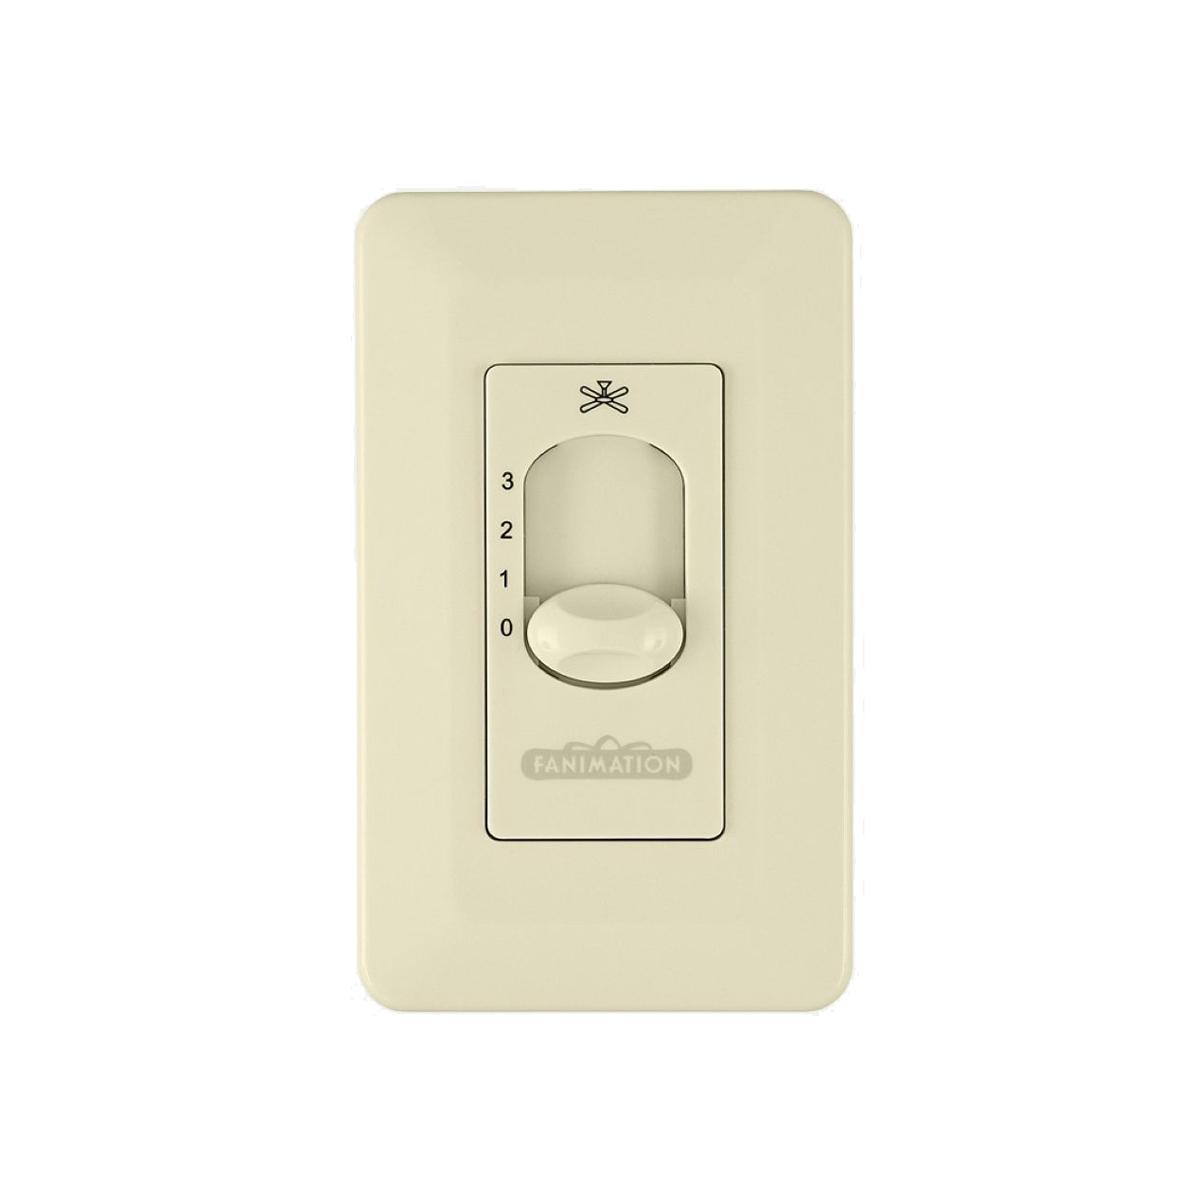 3-Speed Ceiling Fan Wall Control For 2 or More Fans, Non-Reversing - Bees Lighting